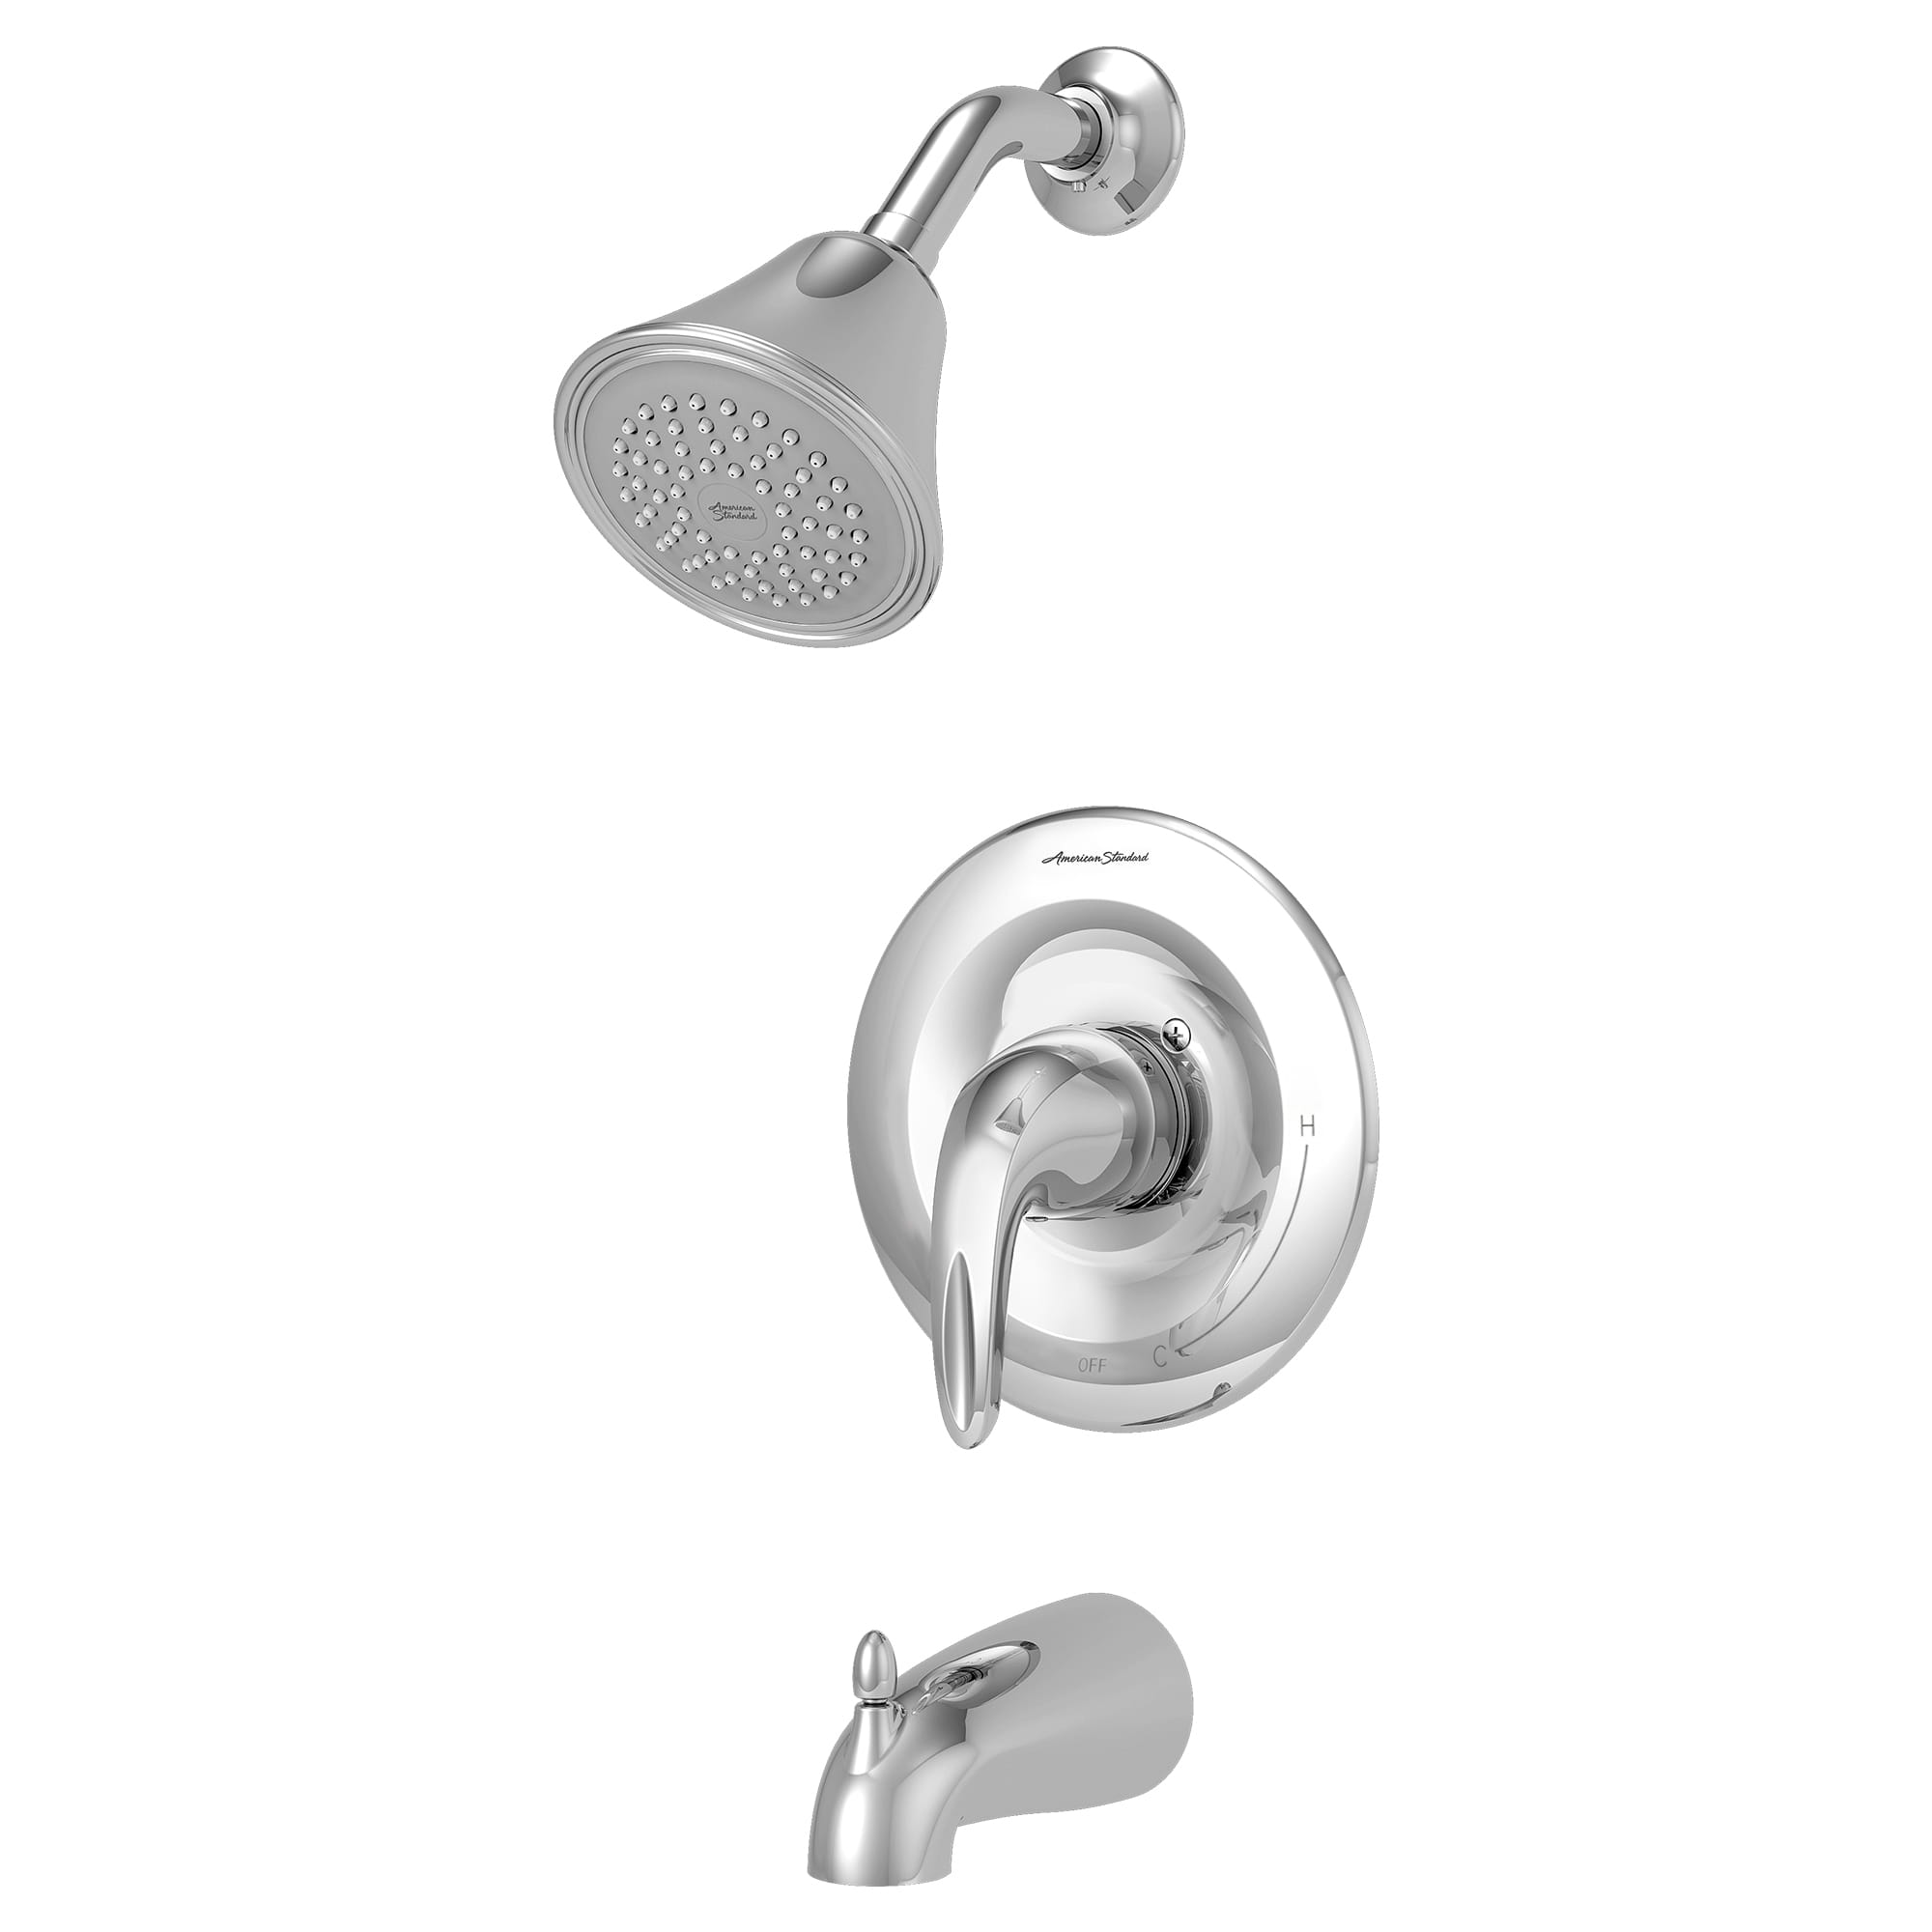 Reliant 3 25 gpm 95 L min Tub and Shower Trim Kit With Showerhead Double Ceramic Pressure Balance Cartridge With Lever Handle CHROME